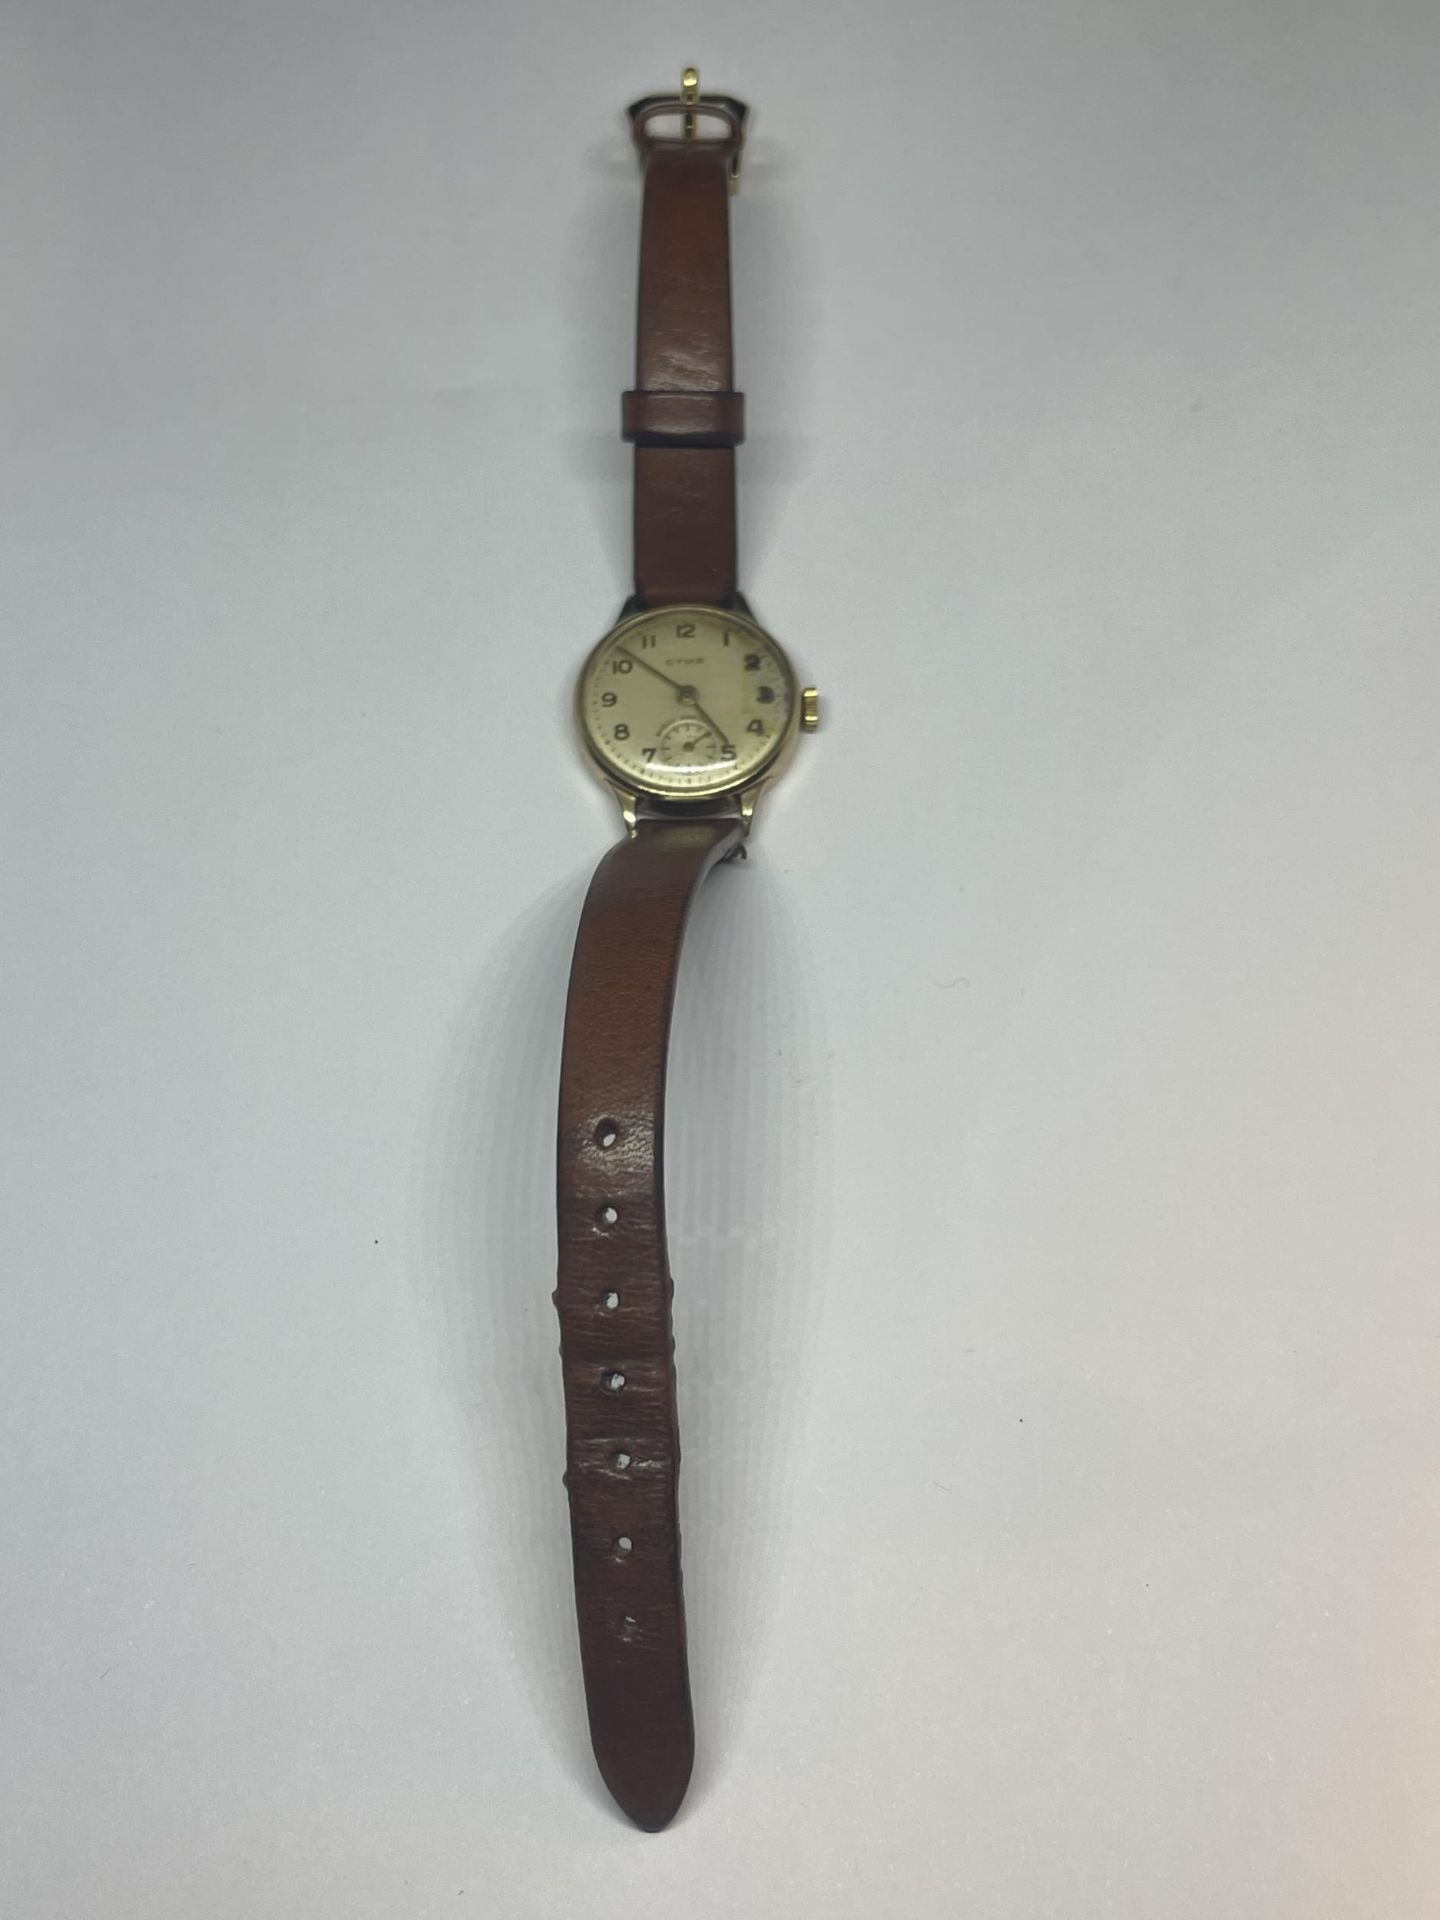 A LADIES CYMA 9 CARAT GOLD CASED WRIST WATCH WITH BROWN LEATHER STRAP SEEN WORKING AT THE TIME OF